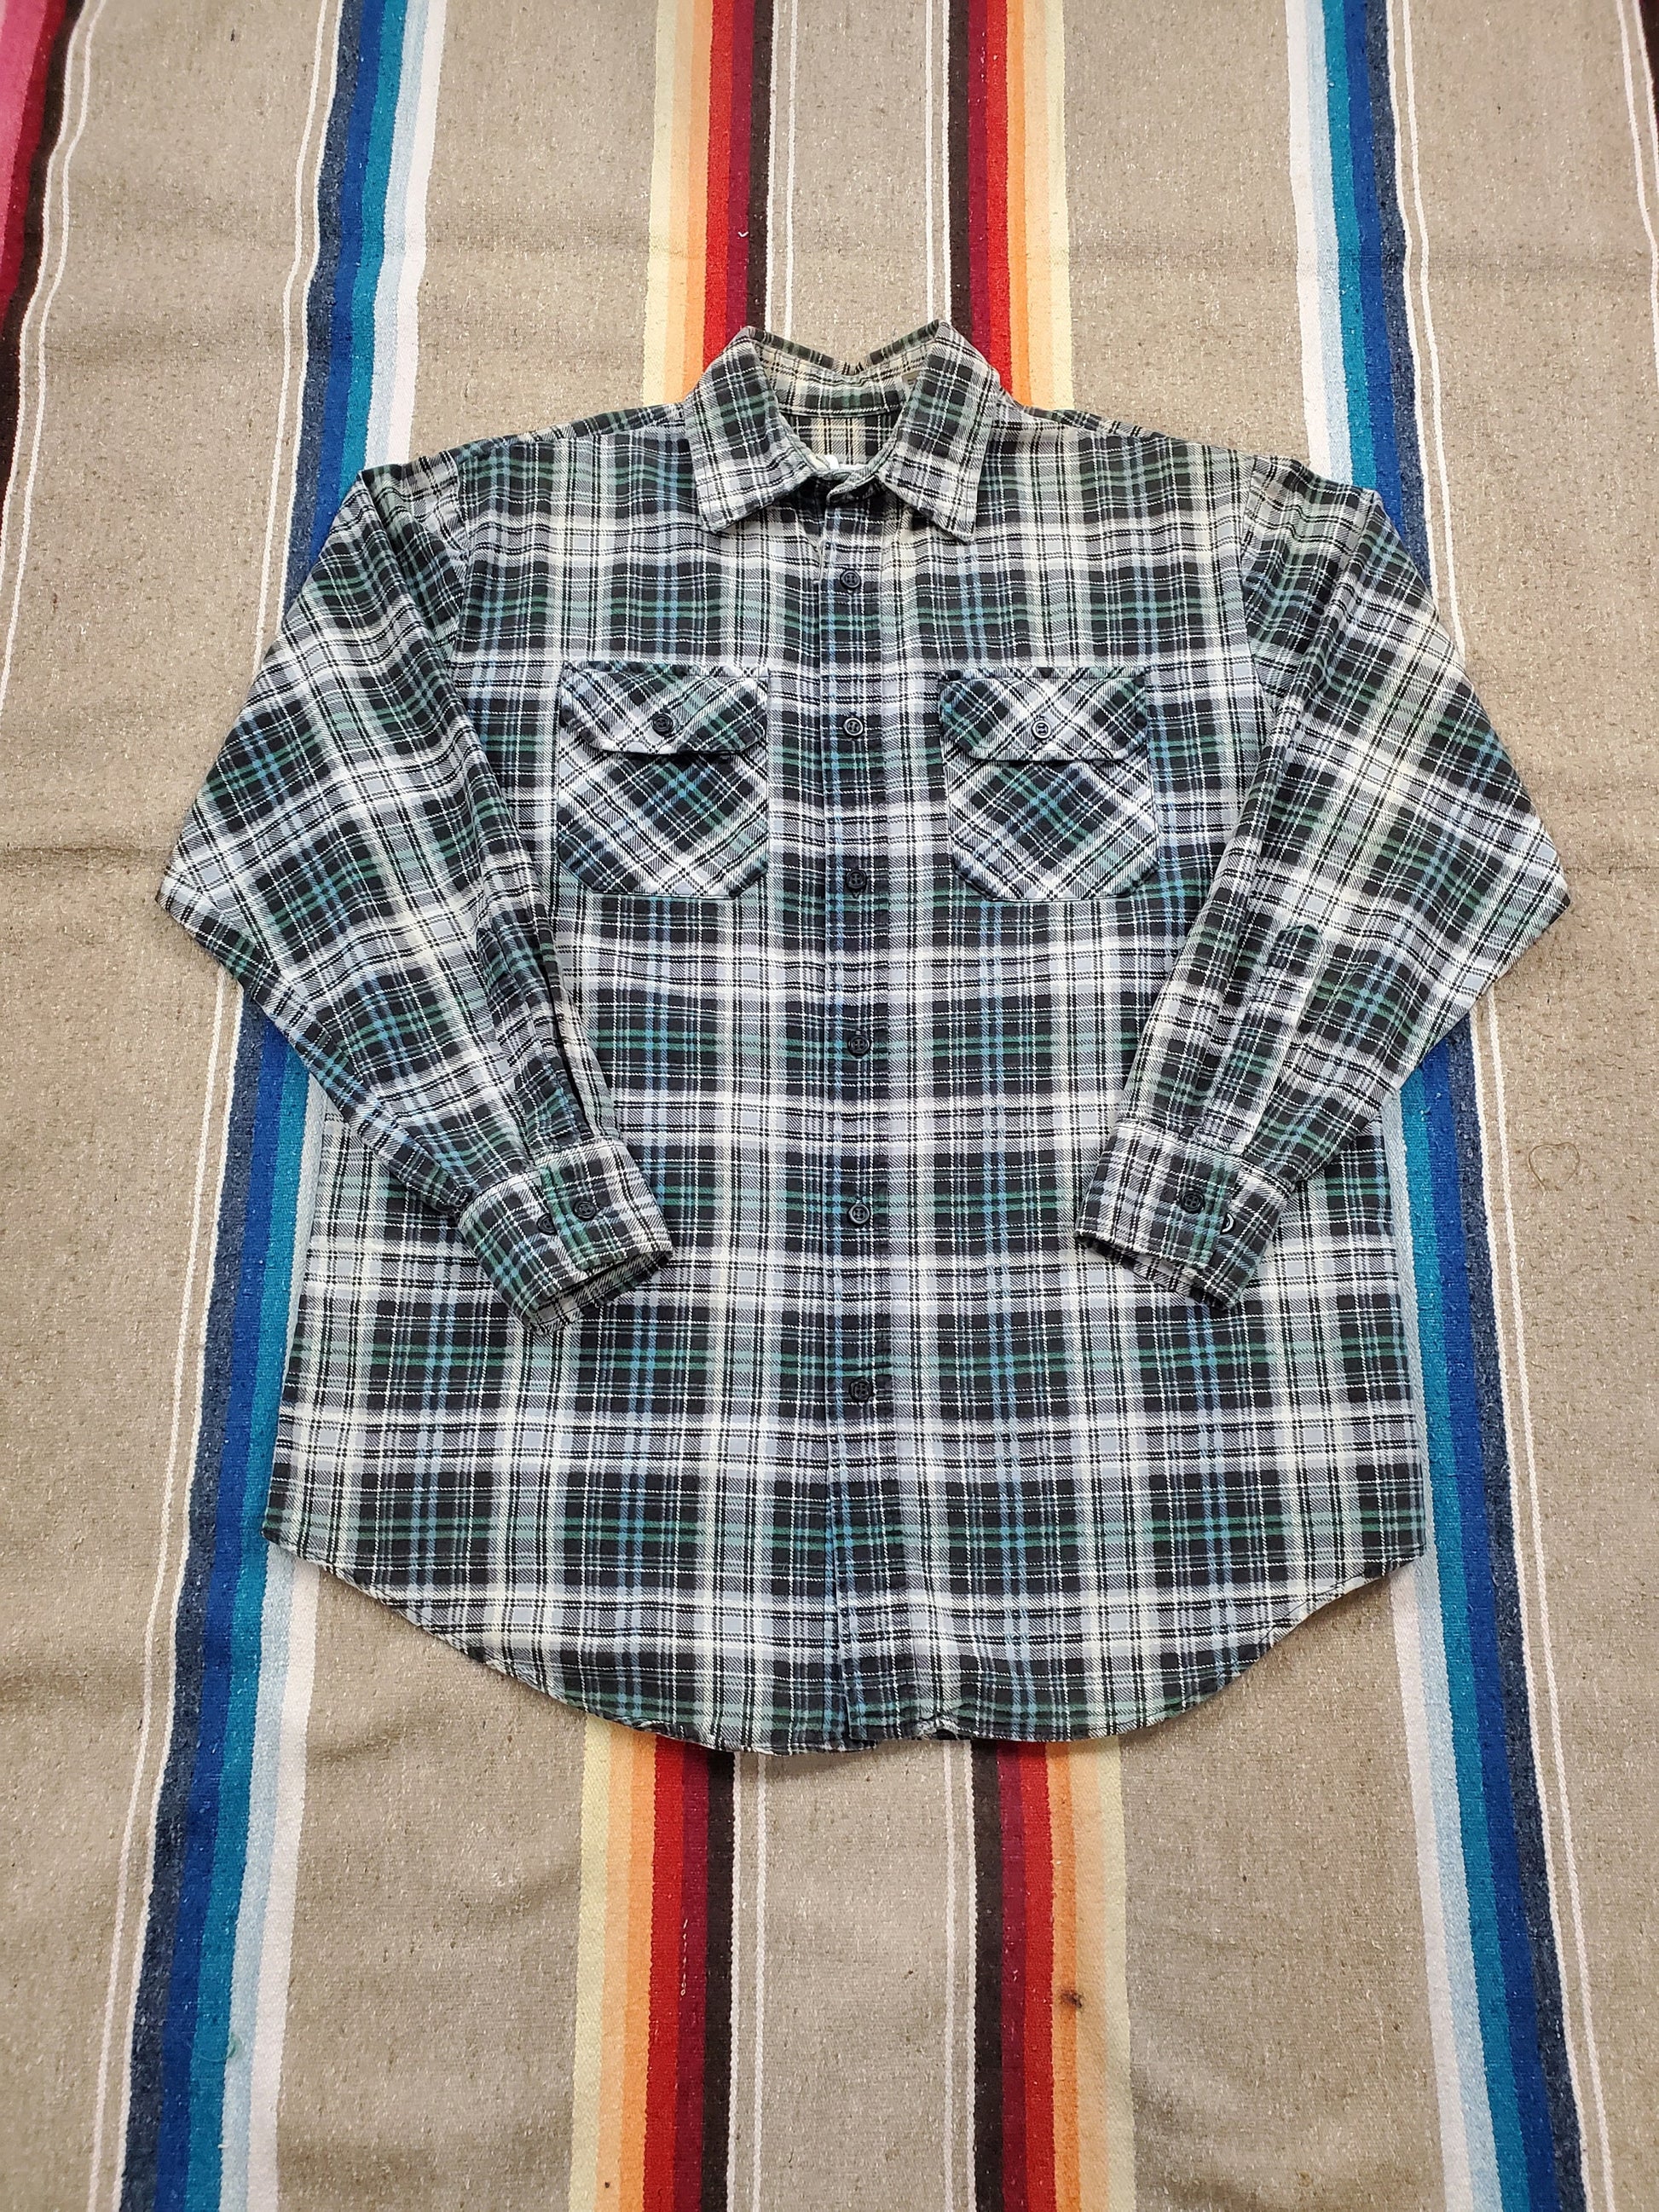 1980s Dickies Printed Cotton/Rayon Blend Flannel Shirt Size M/L